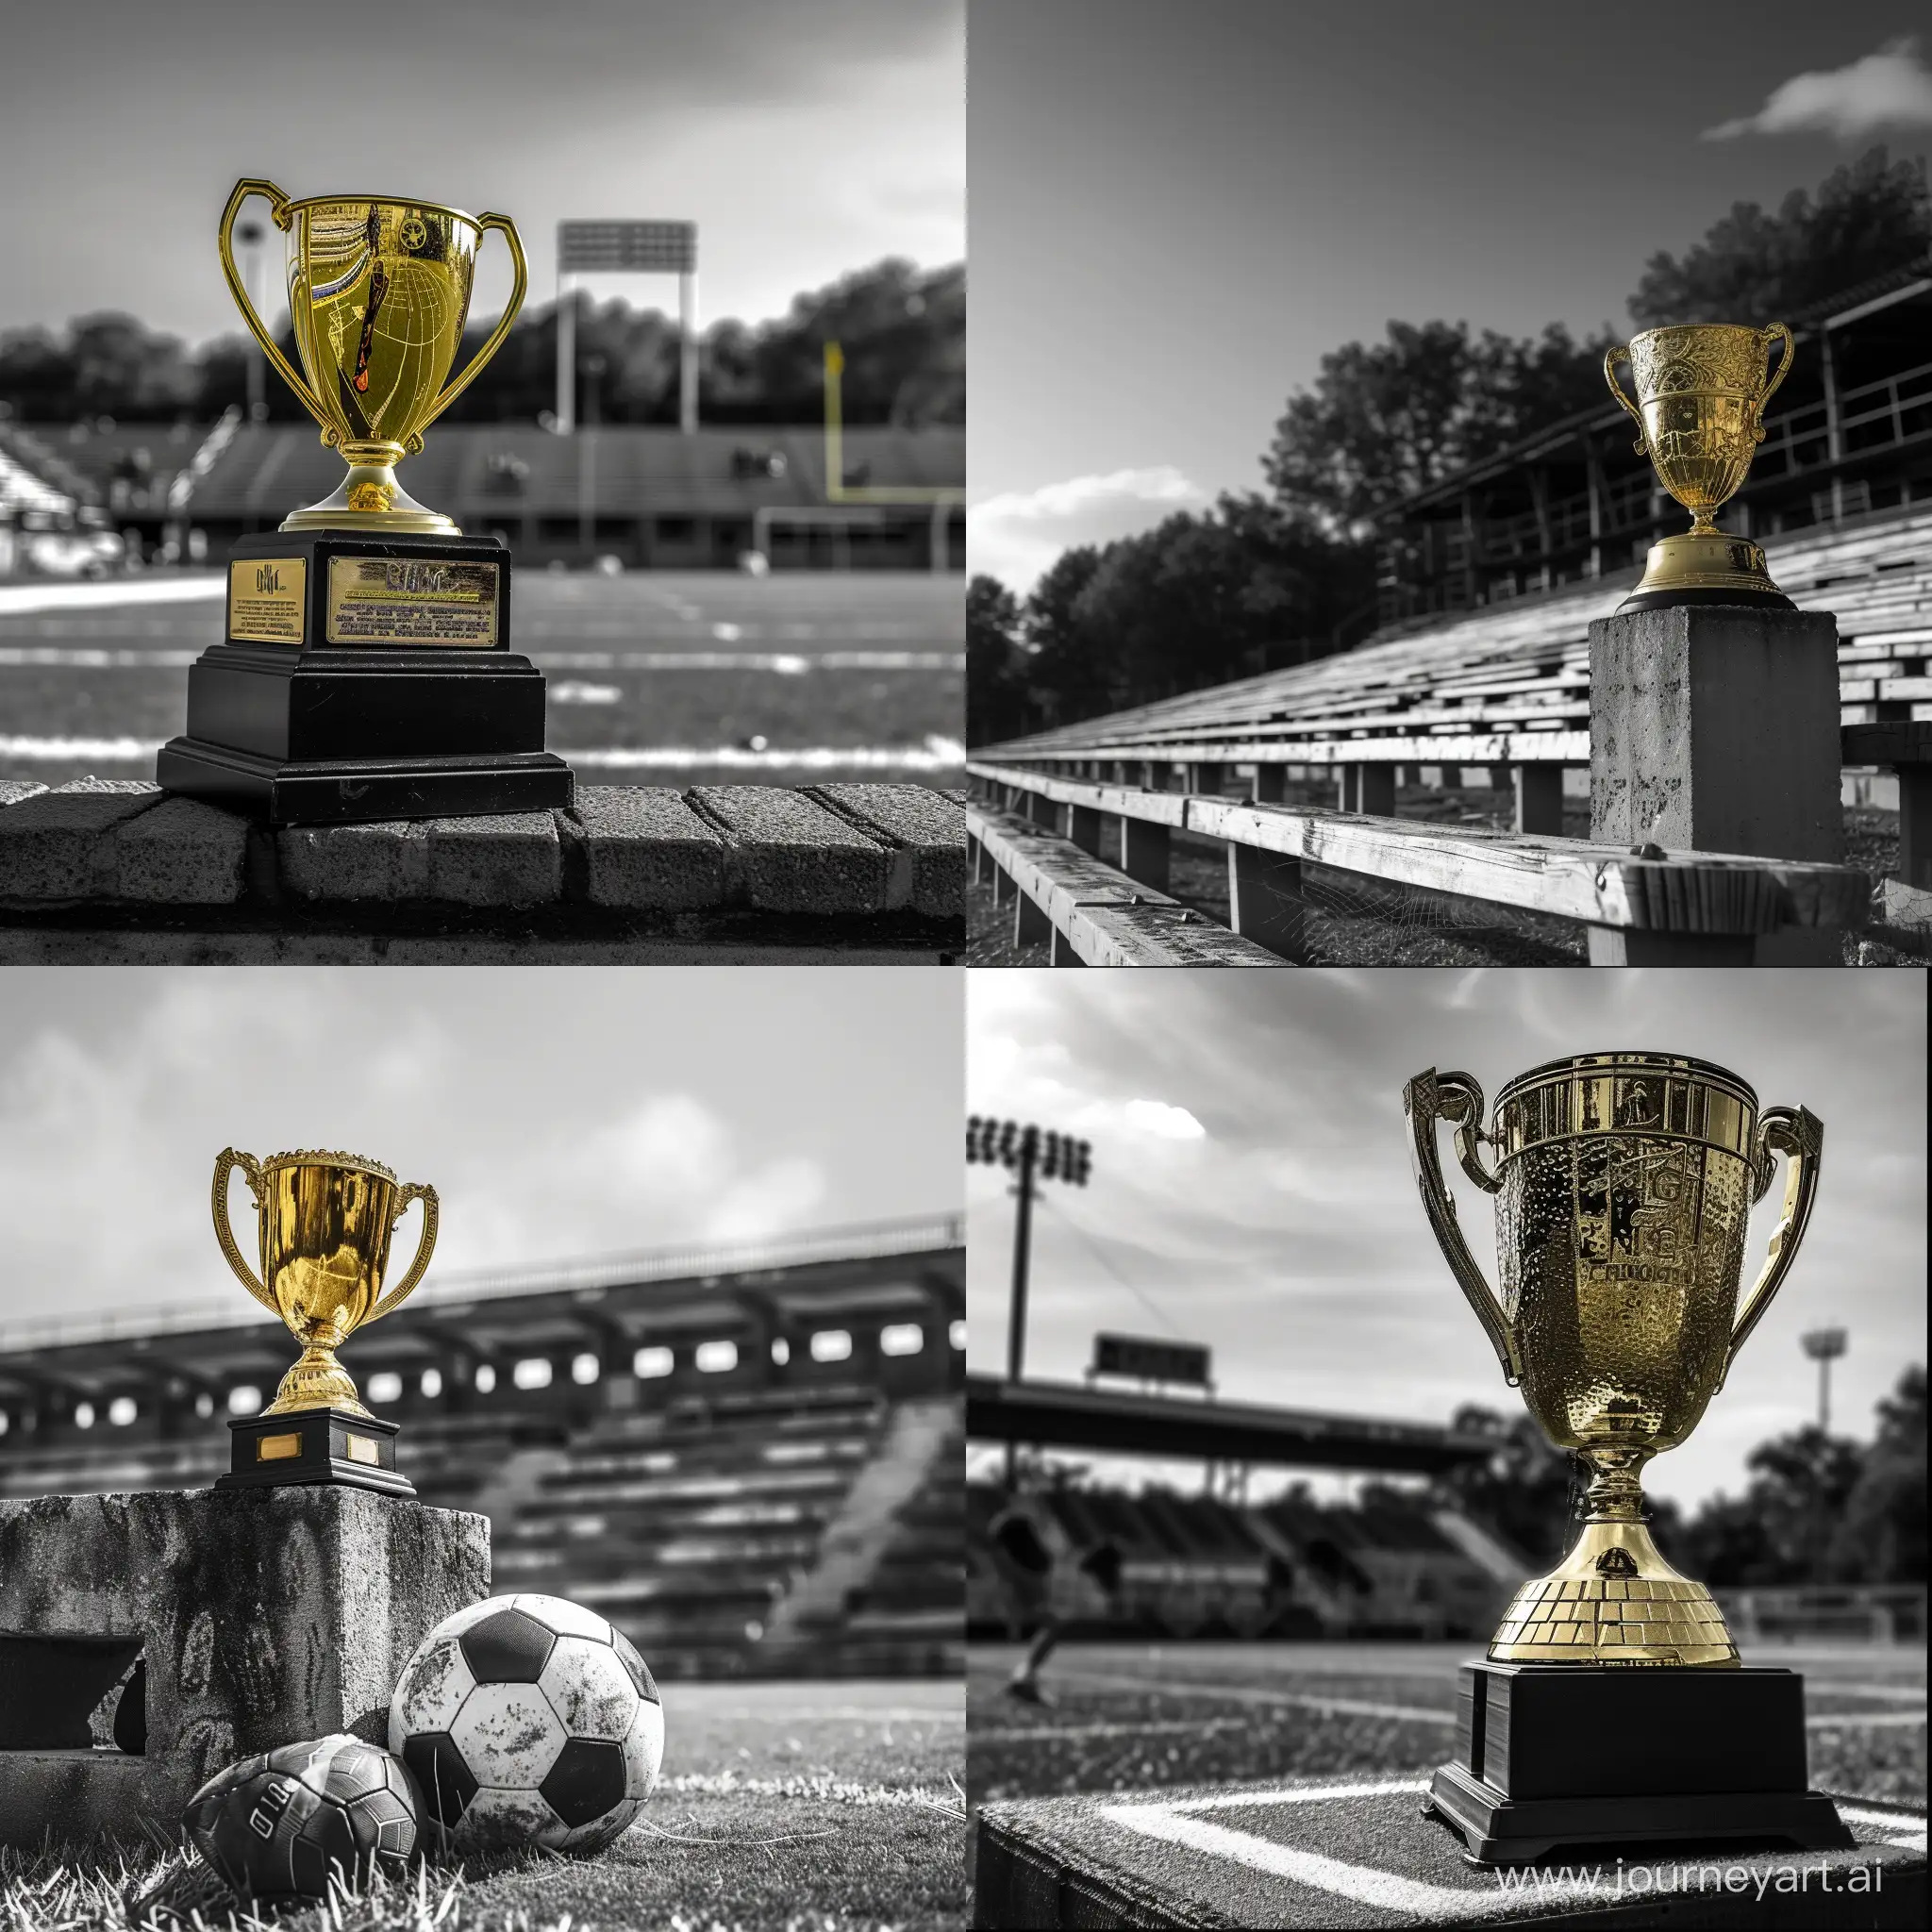 dramatic old school football stadium with gold trophy on it, use black and white colour